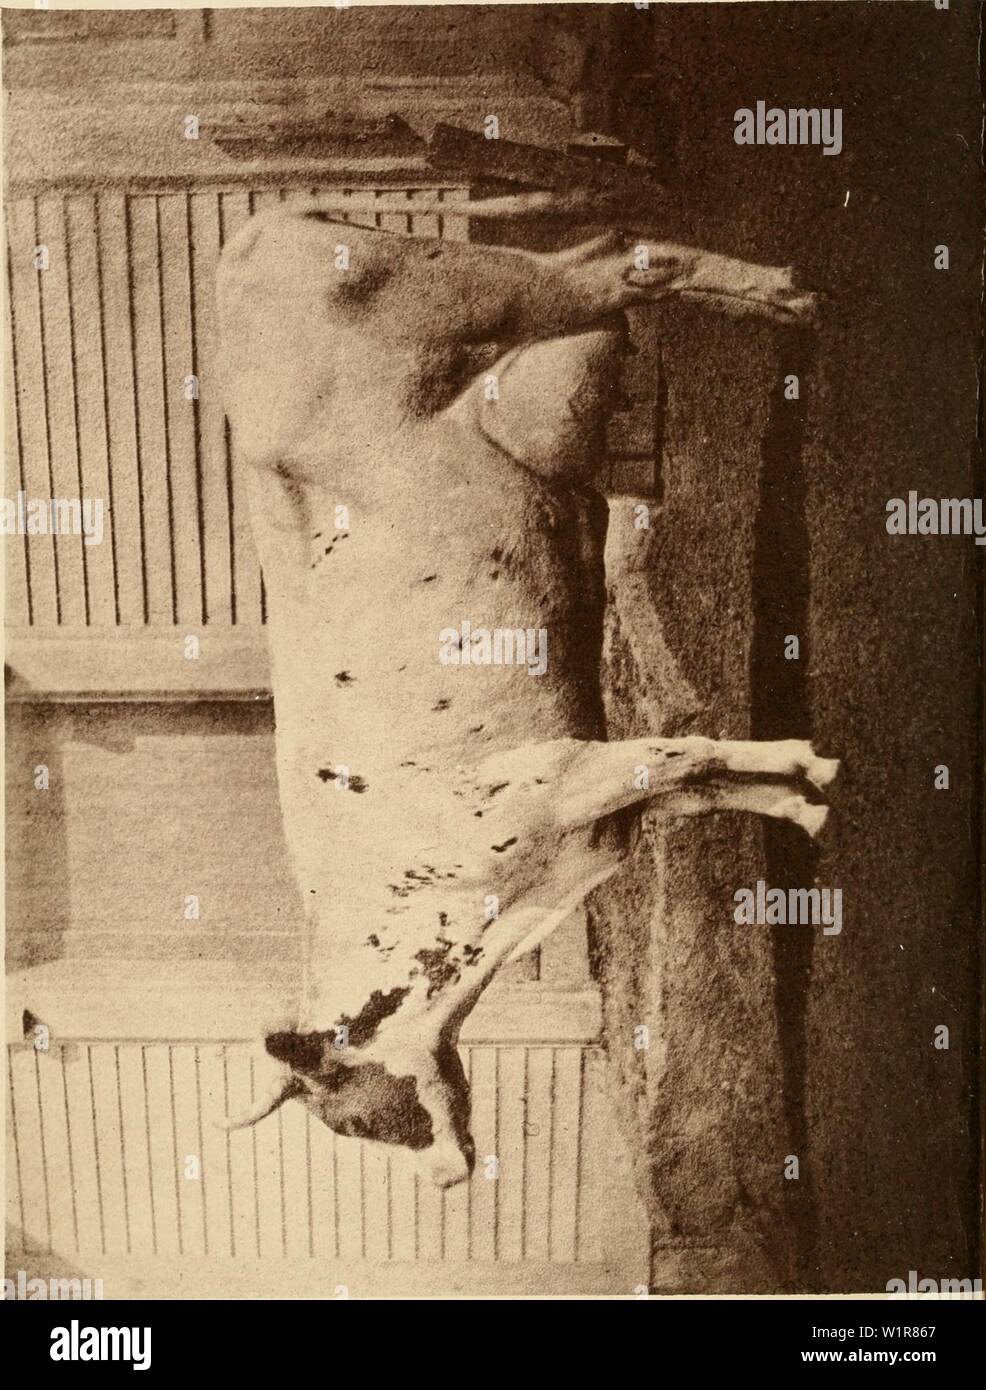 Archive image from page 7 of The dairy cow A monograph. The dairy cow. A monograph on the Ayrshire breed of cattle  dairycowmonograp00stur Year: 1875 Stock Photo